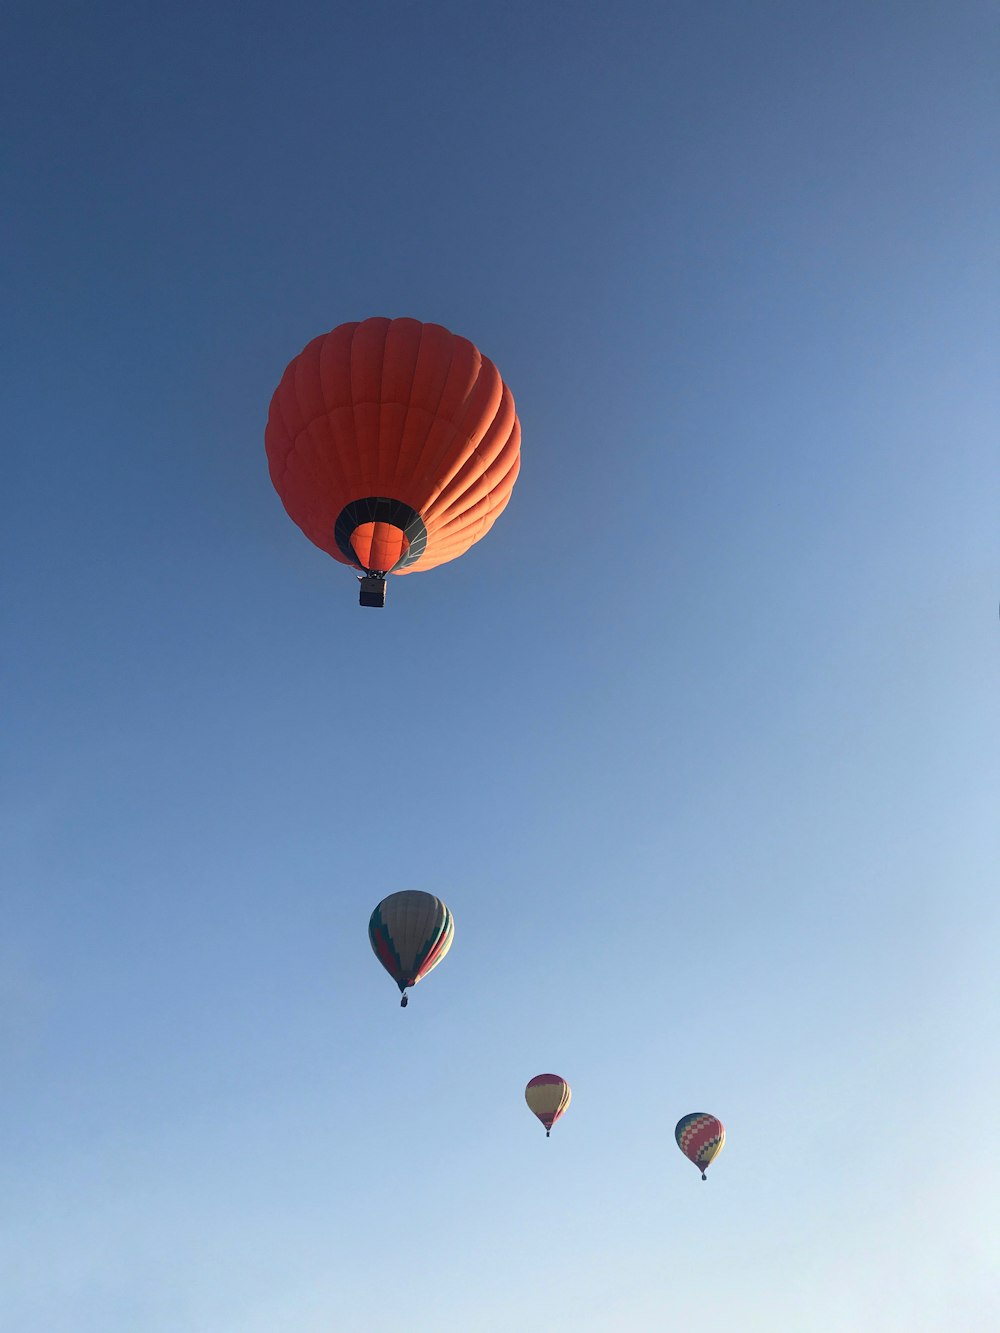 four hot air balloons in mid air during daytime